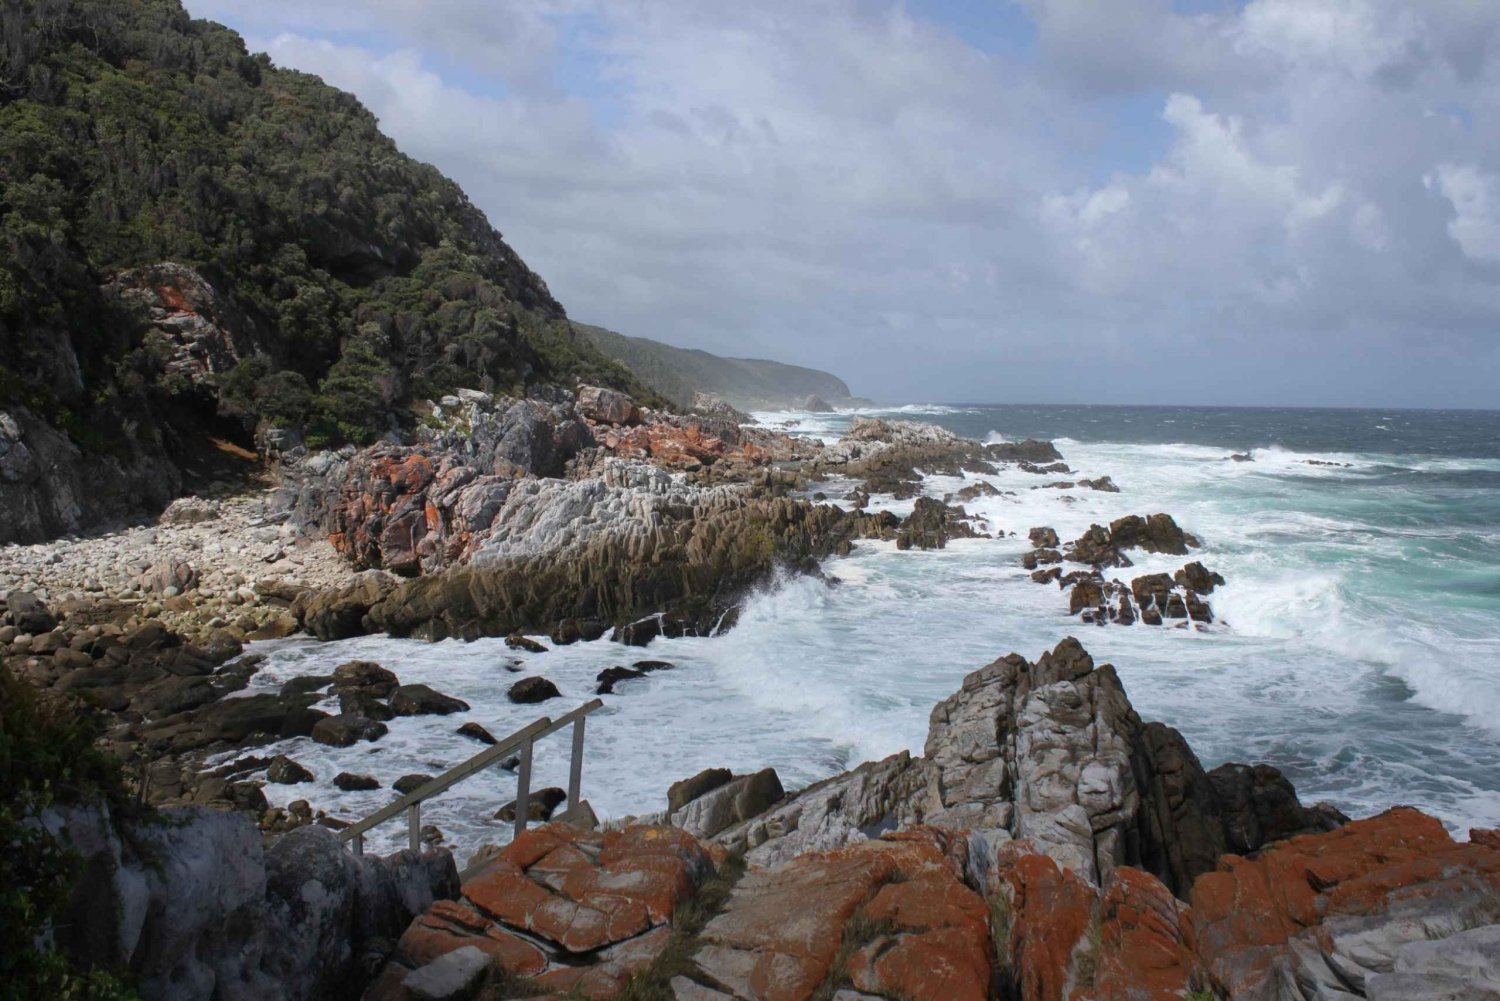 4-dages Garden Route-oplevelse